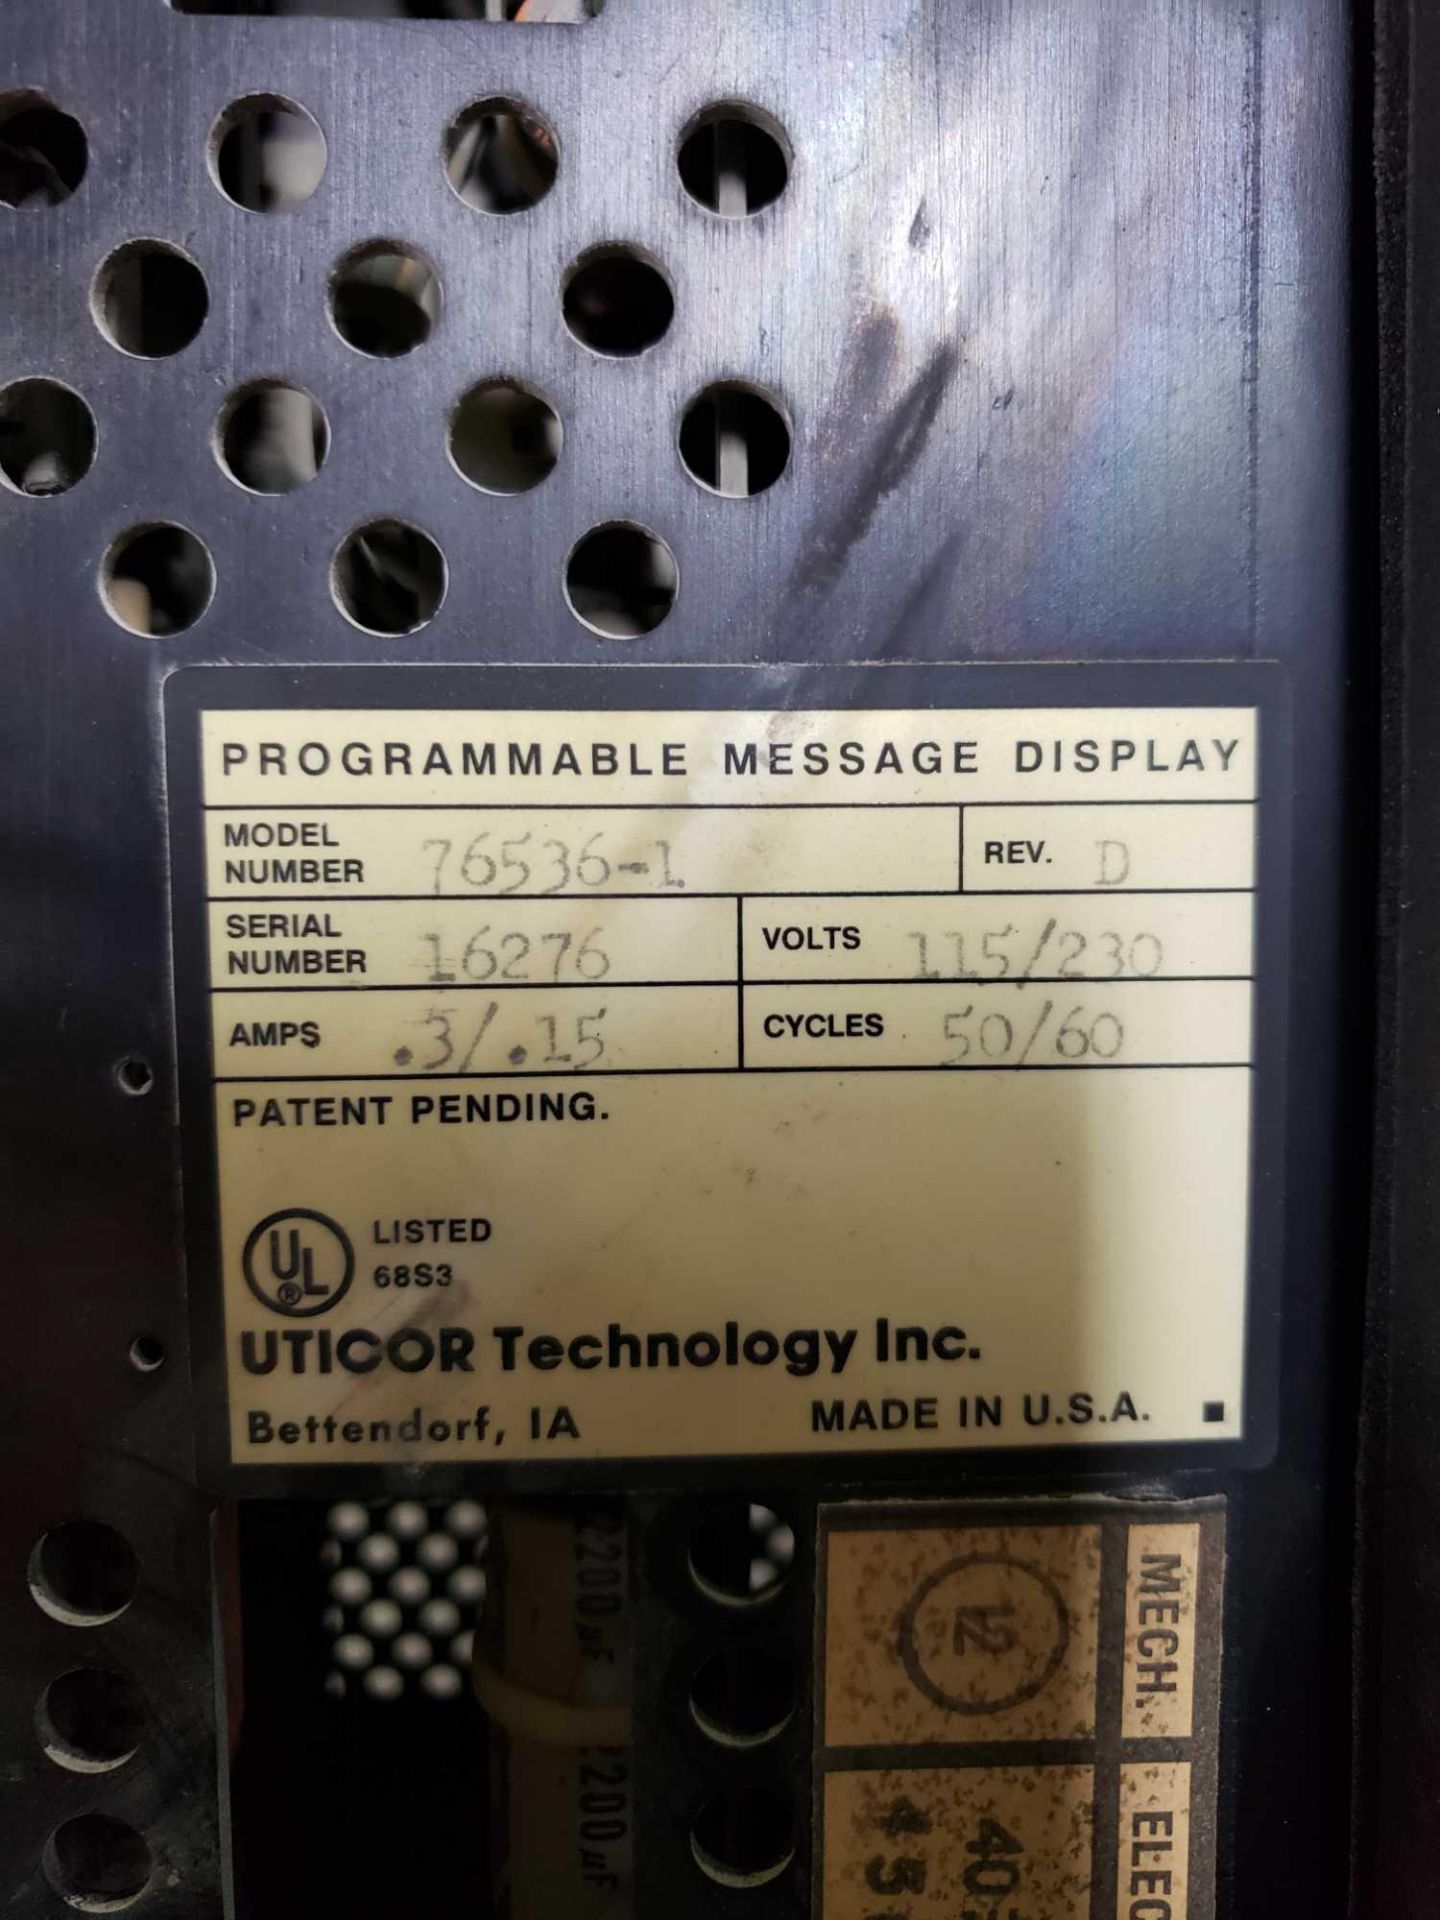 Uticor Technology PMD200 programmable message display model 76536-1. - Image 3 of 3